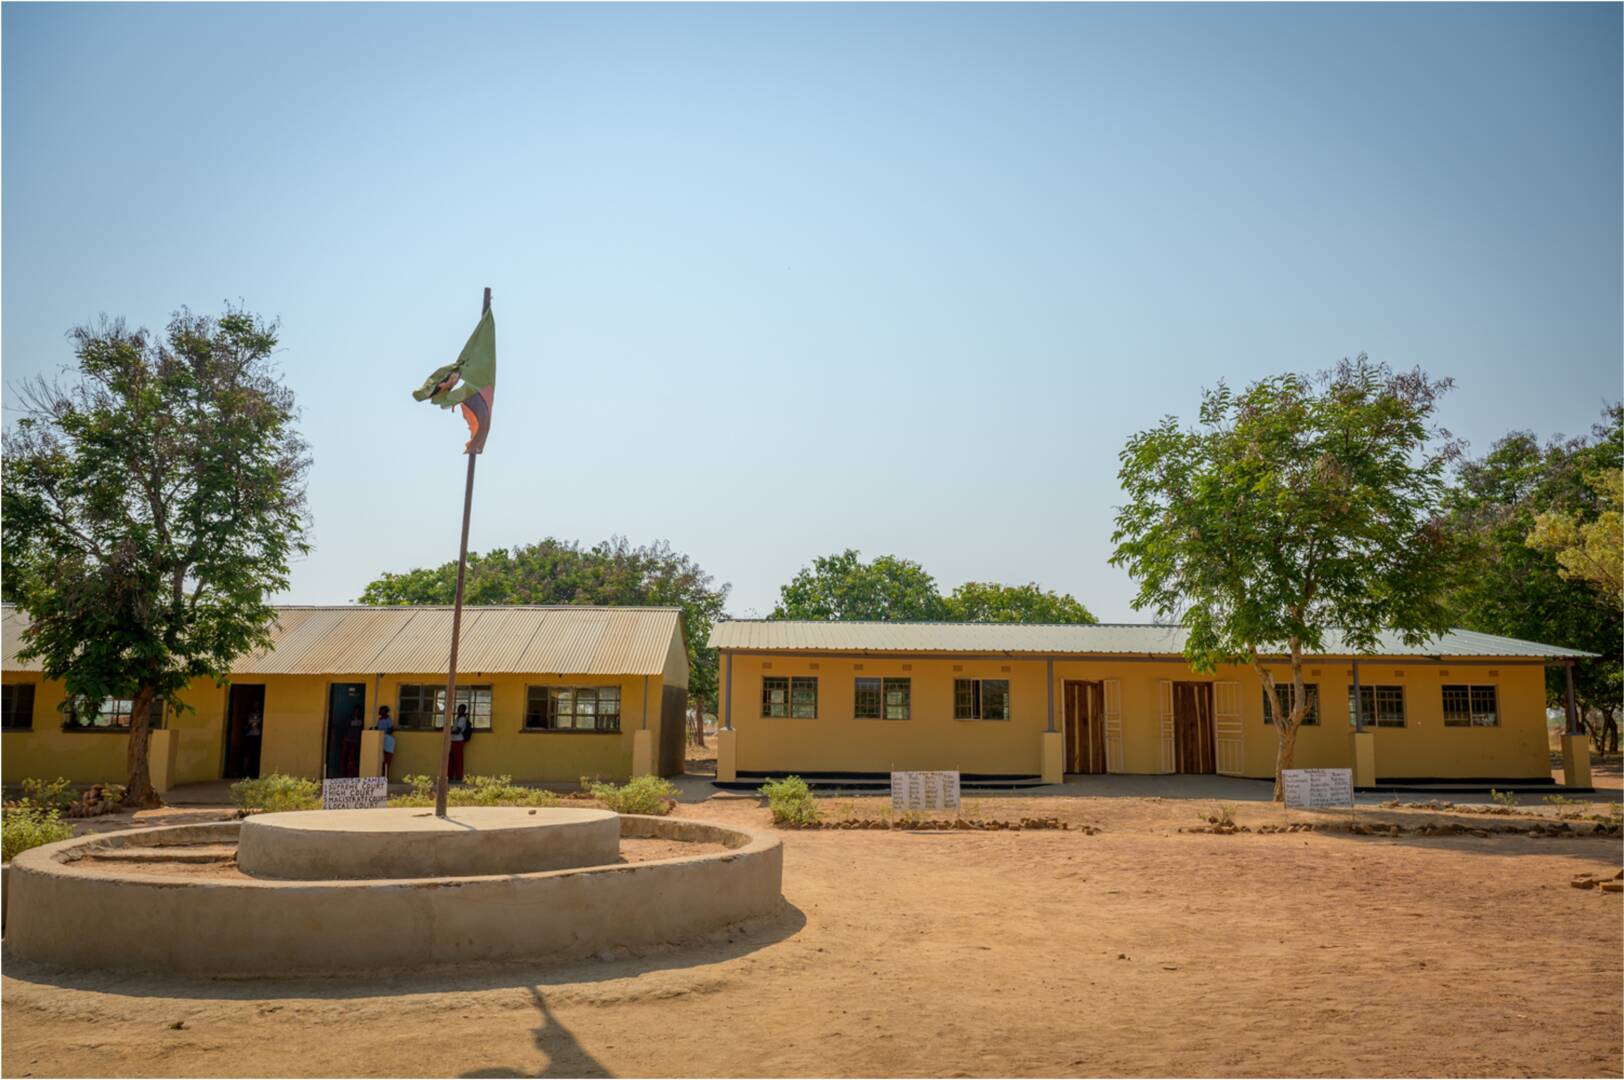 A Zambian flag waves on a pole in front of two single-story, tin-roofed school buildings. The sky behind the school is blue and clear.